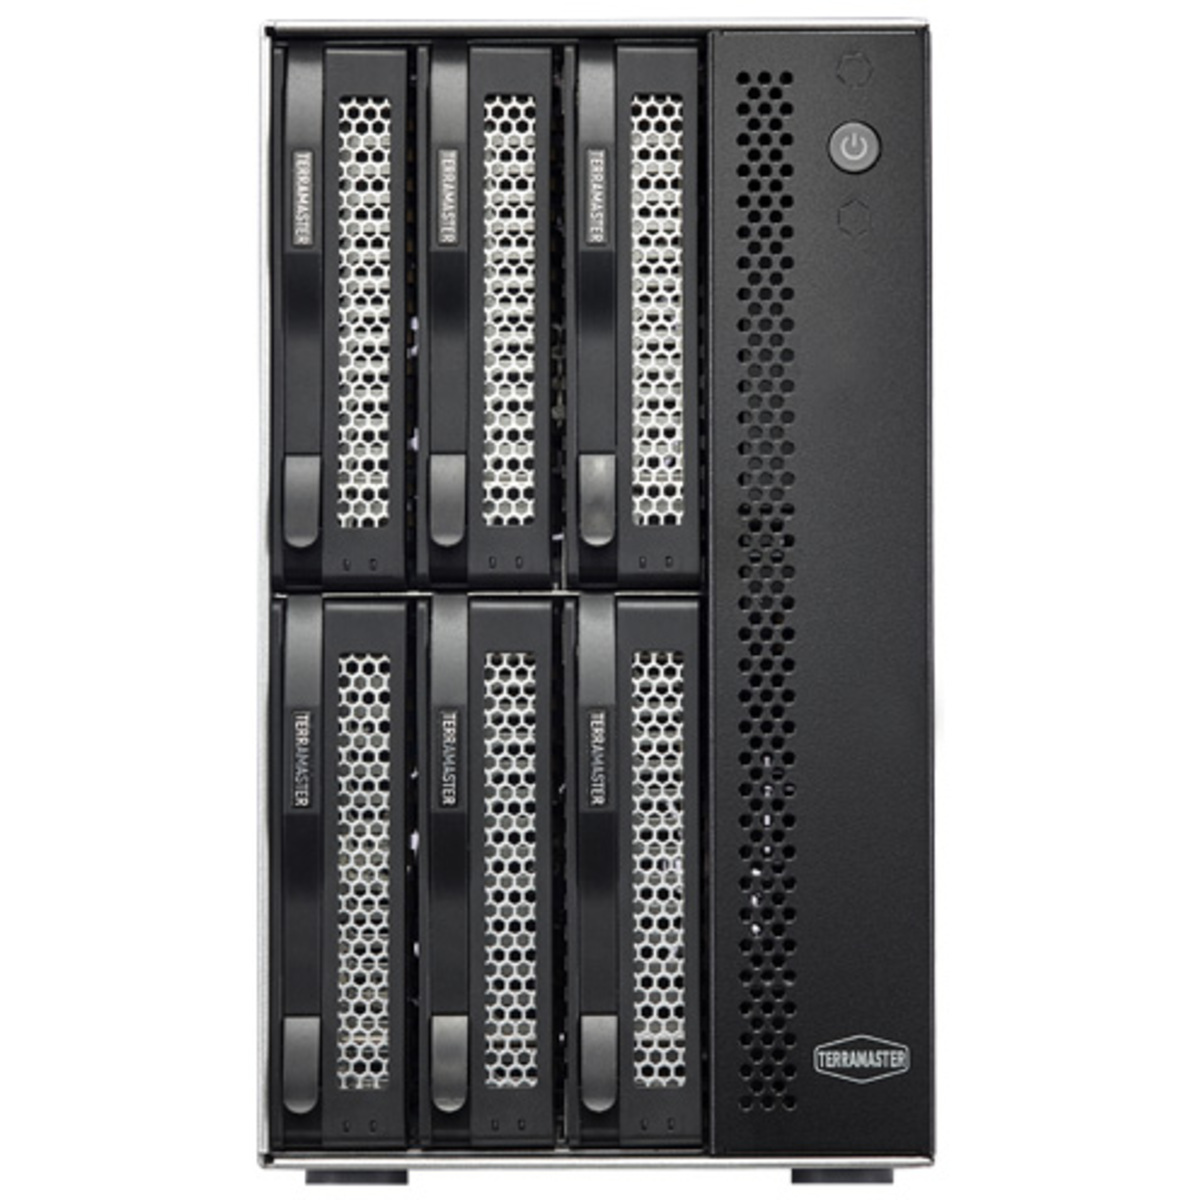 buy $2473 TerraMaster D6-320 120tb Desktop DAS - Direct Attached Storage Device 6x20000gb Seagate EXOS X20 ST20000NM007D 3.5 7200rpm SATA 6Gb/s HDD ENTERPRISE Class Drives Installed - Burn-In Tested - nas headquarters buy network attached storage server device das new raid-5 free shipping usa D6-320